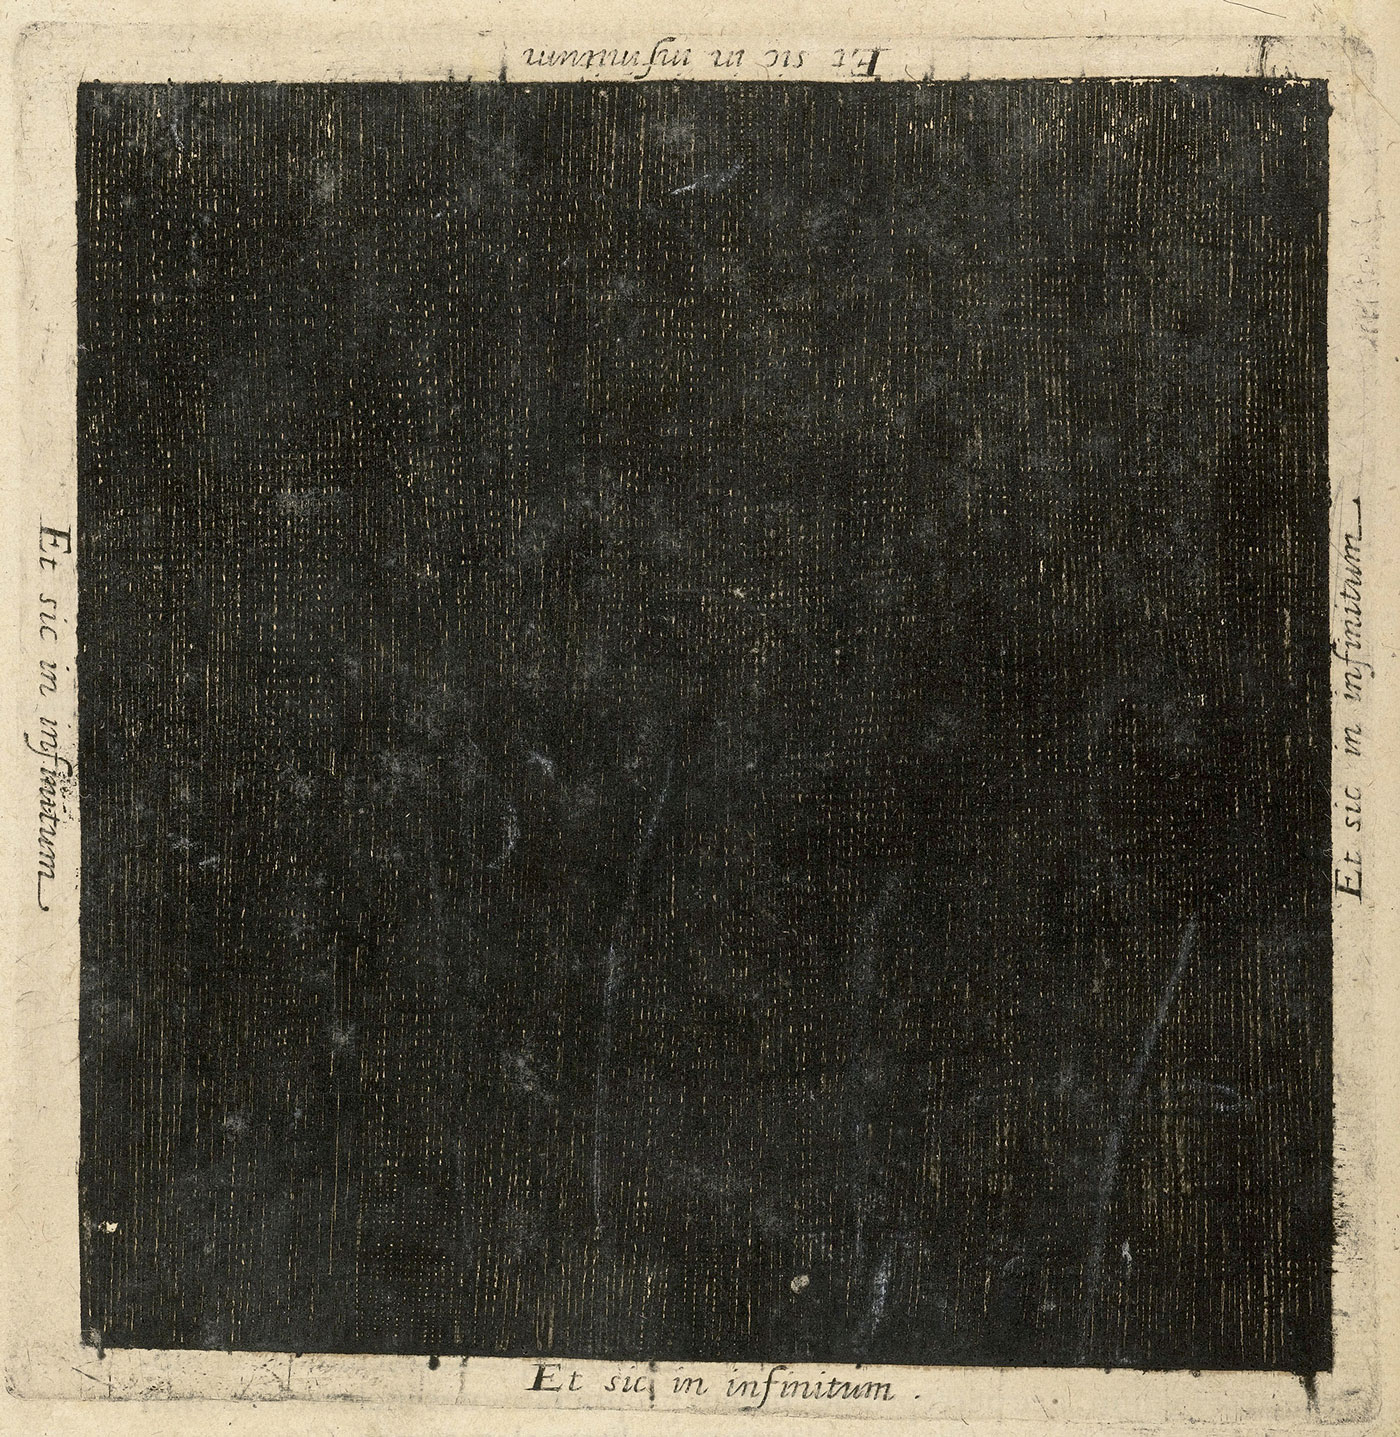 A plate representing the primordial darkness of the universe at the moment before creation in Robert Fludd’s 1617 “The Metaphysical, Physical, and Technical History of the Two Worlds, Namely the Greater and the Lesser.” The words “and like this to infinity” are written on all four sides of the square. 